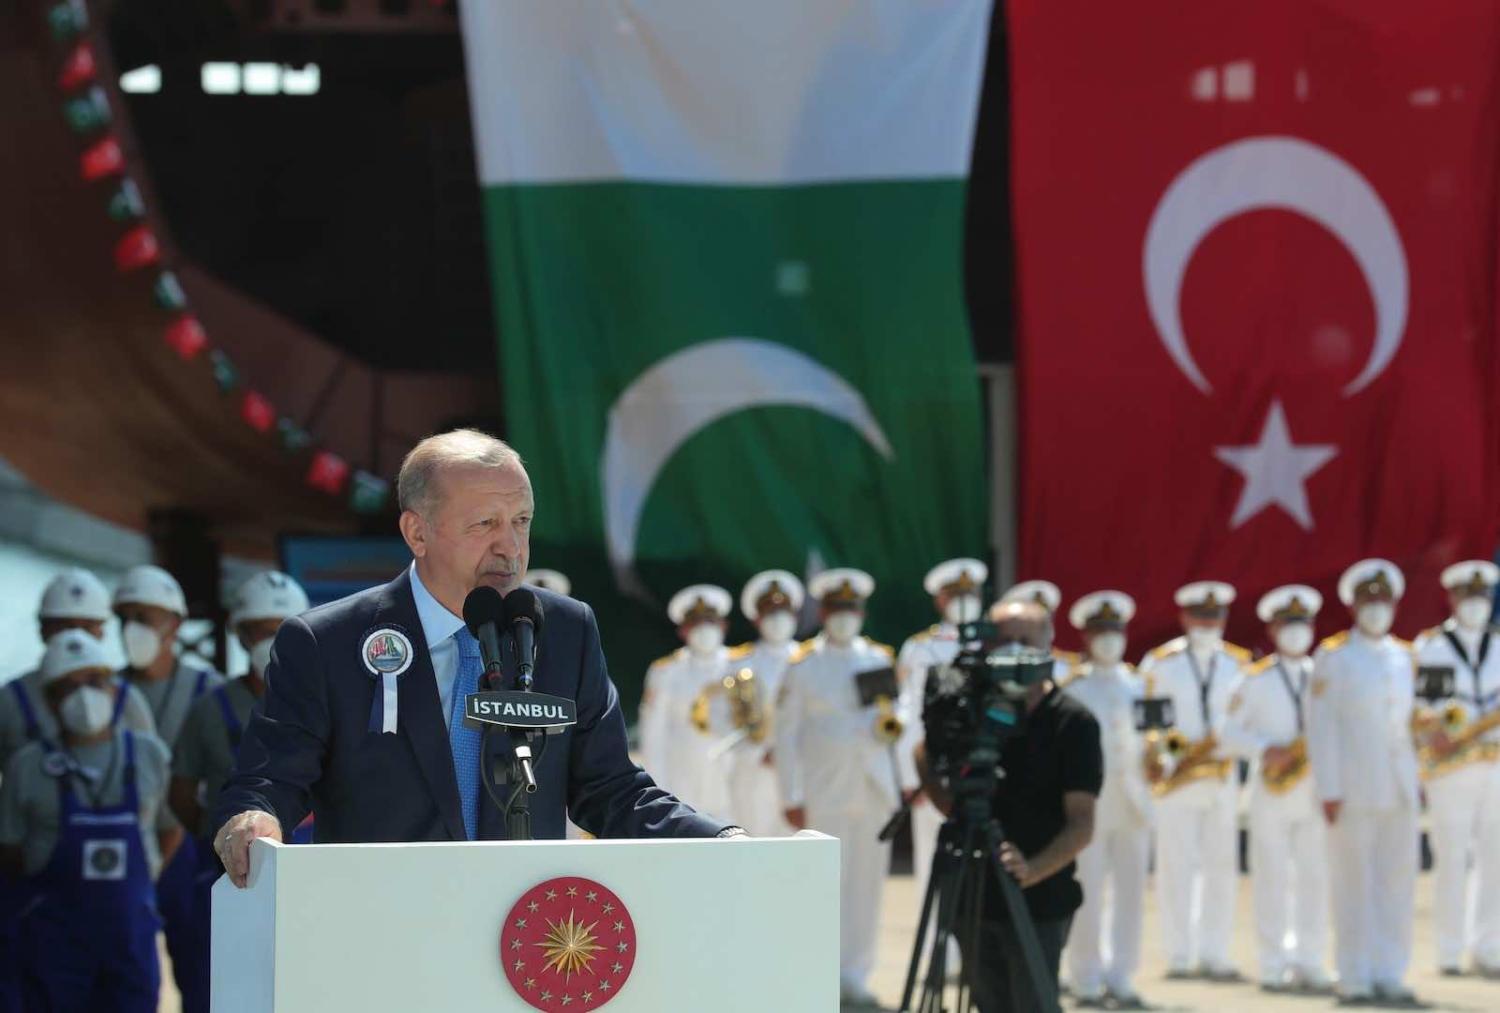 Turkish President Recep Tayyip Erdoğan in Istanbul on 15 August promising to increase cooperation with Pakistan to dispel concerns about a new wave of migration from Afghanistan (Xinhua via Getty Images) 